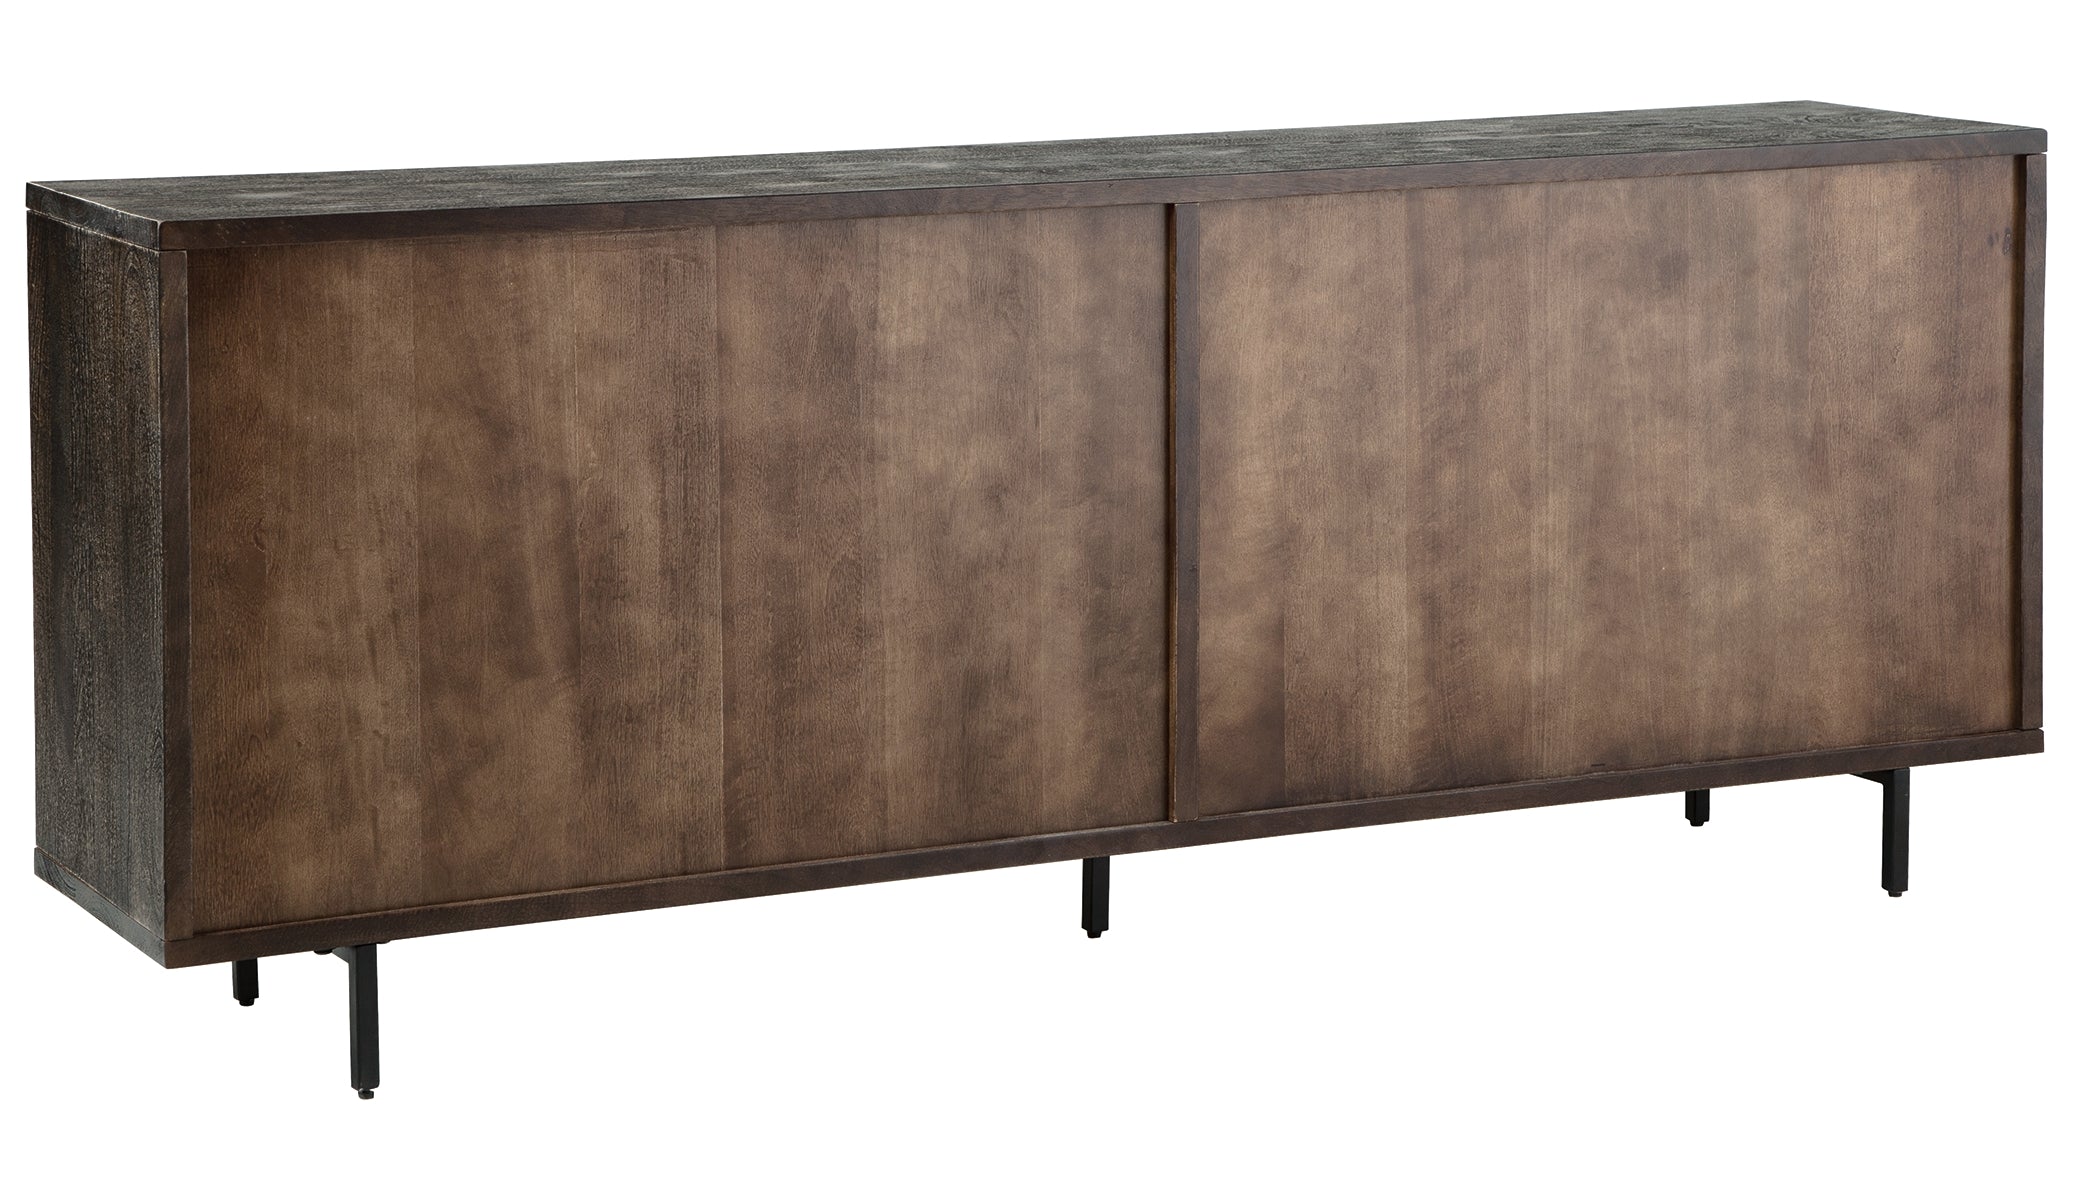 Franchester Accent Cabinet